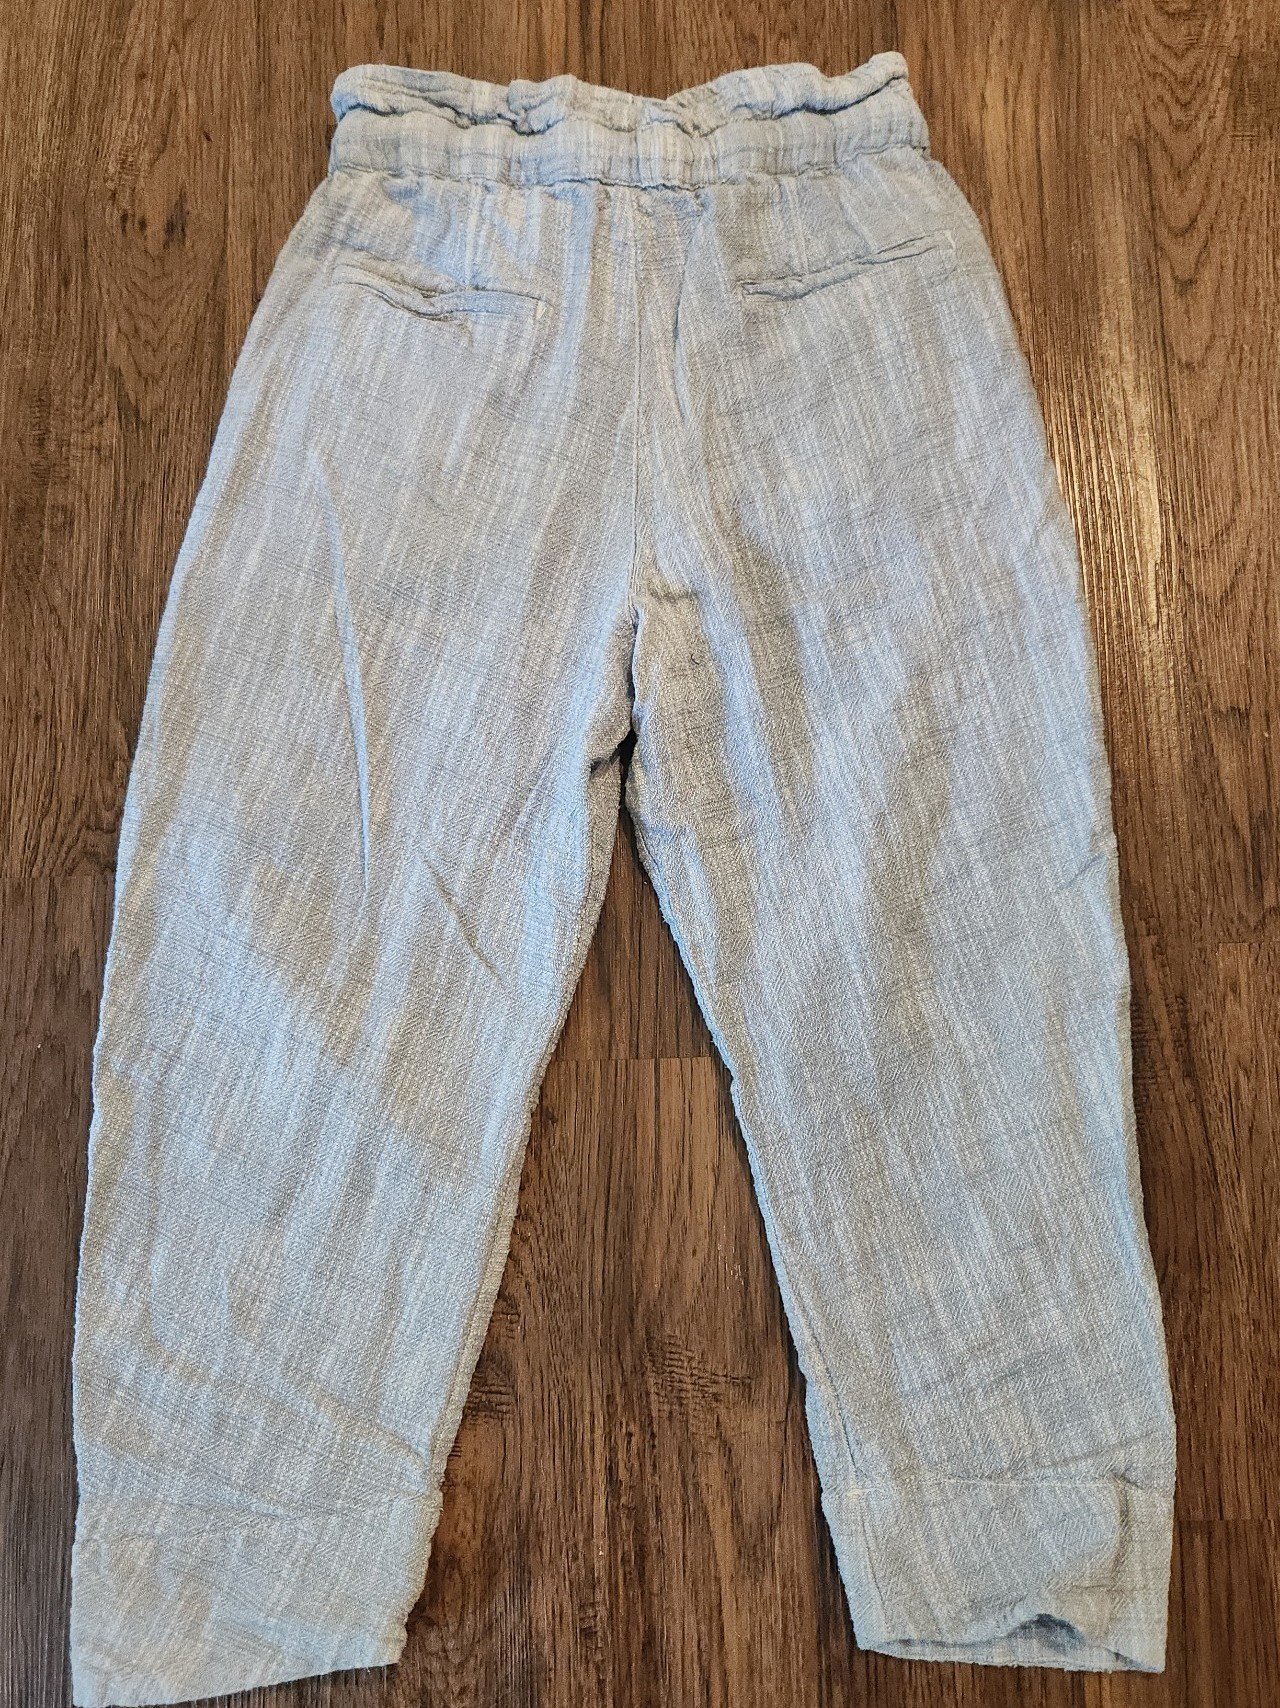 The Best Seller Free People Paradise chambray linen blend pants
size s LTYSaHraA US Sale